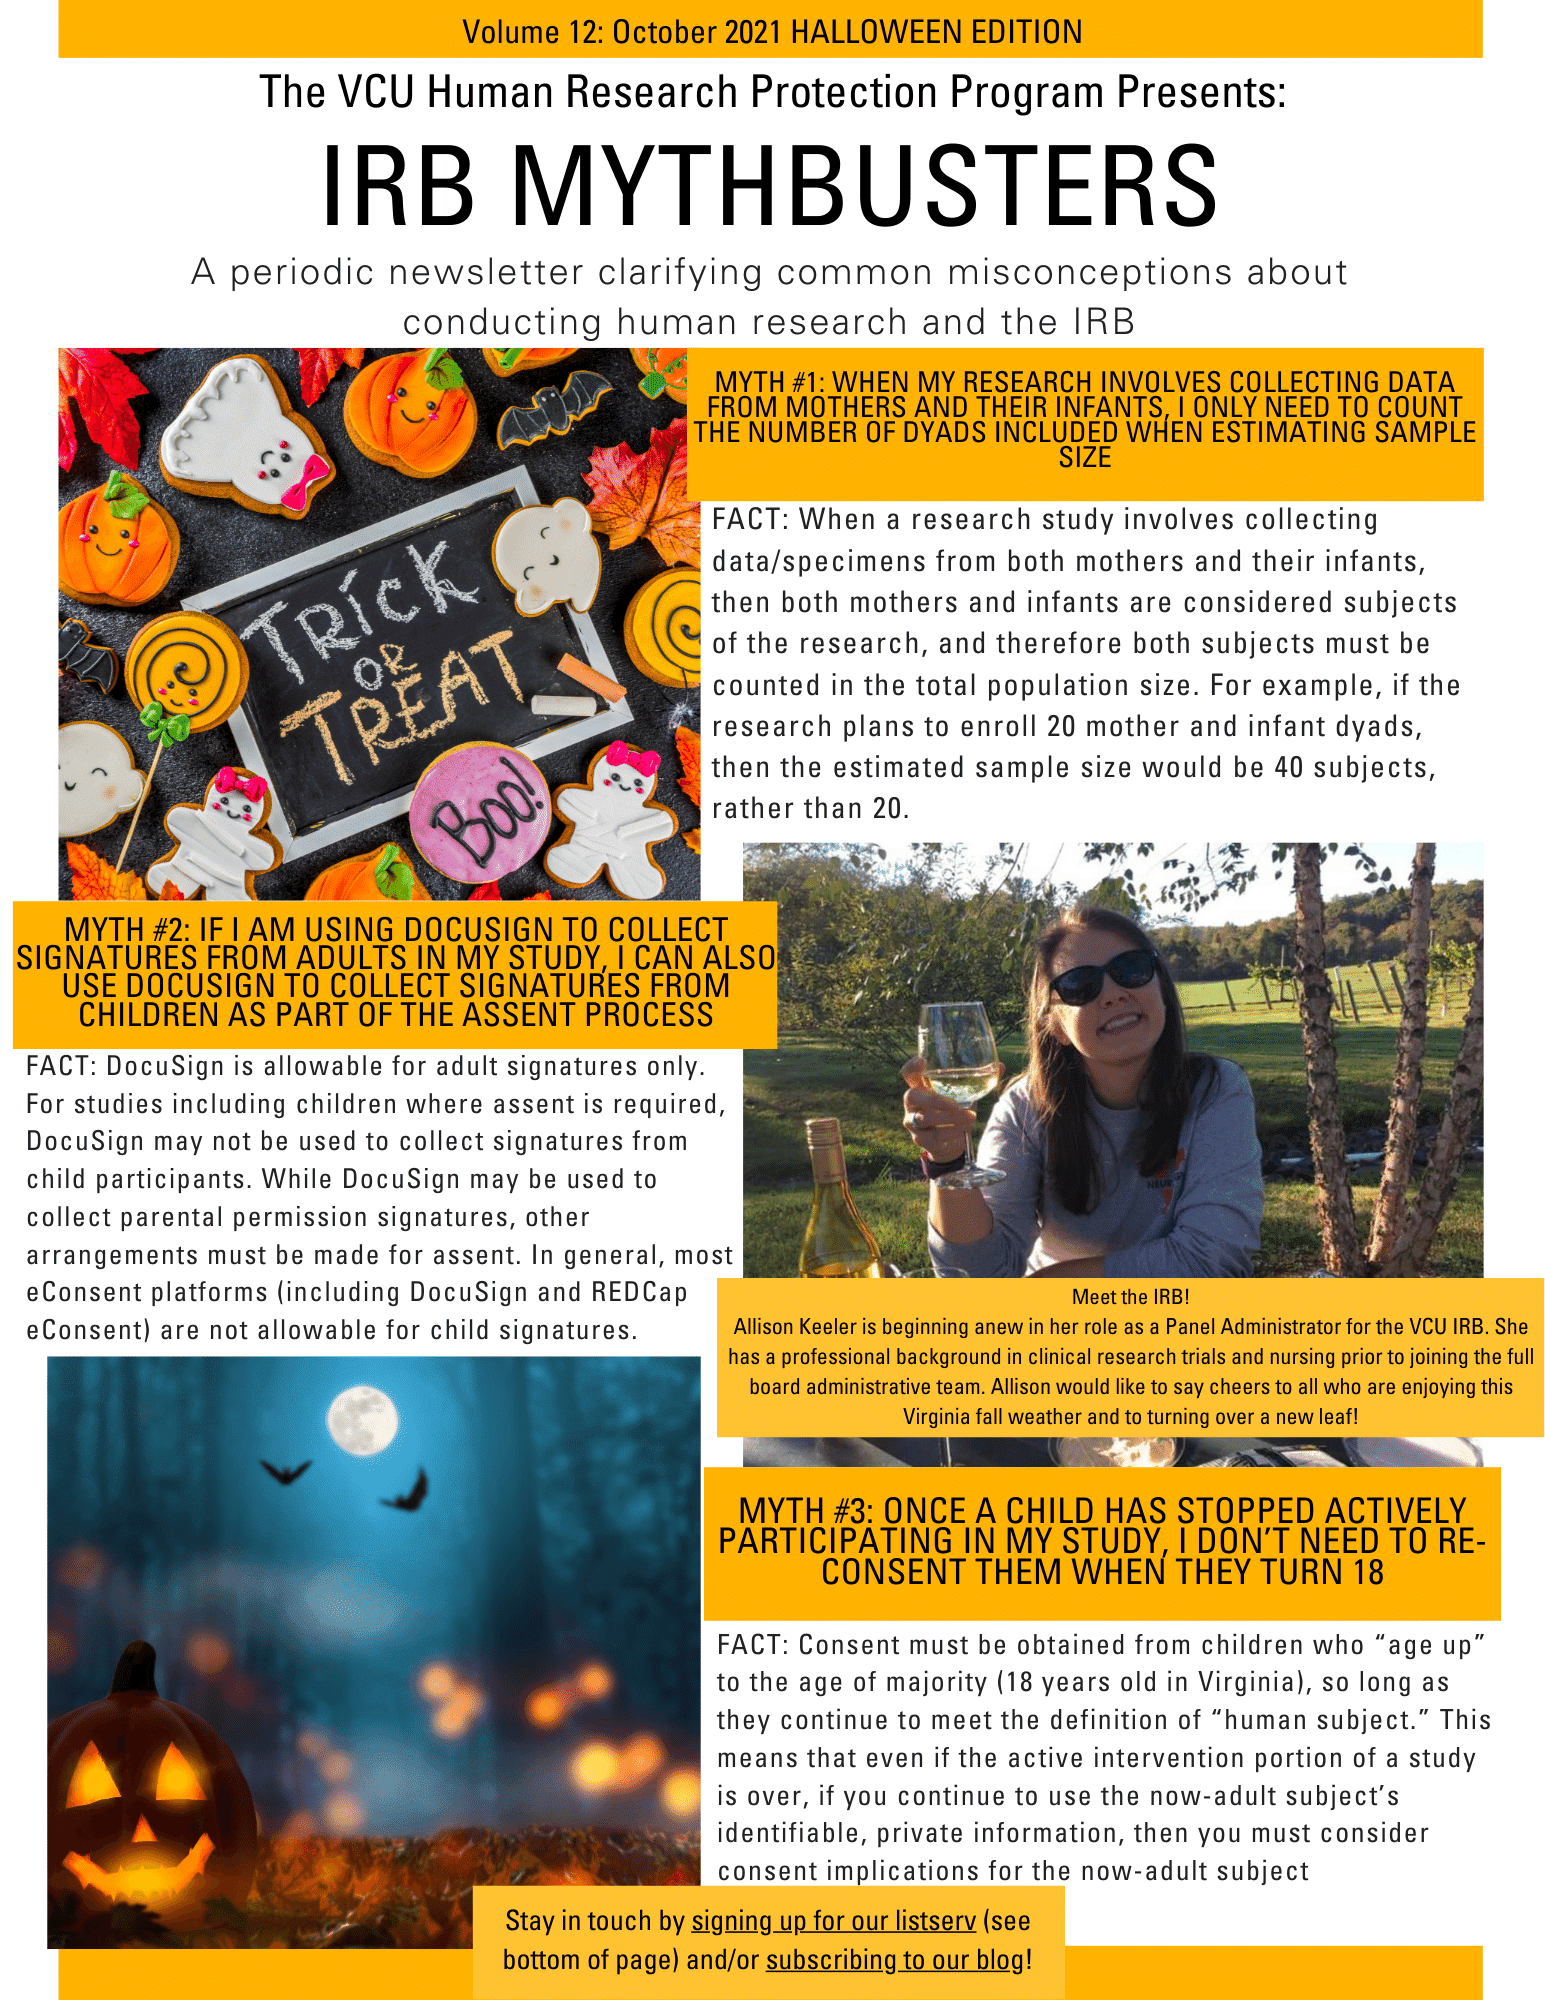 This is an image of the IRB Mythbusters Newsletter. It includes two Halloween-themed images, and an image of a smiling woman wearing sunglasses and holding a drinking glass. The caption to that picture says “Meet the IRB! Allison Keeler is beginning anew in her role as a Panel Administrator for the VCU IRB. She has a professional background in clinical research trials and nursing prior to joining the full board administrative team. Allison would like to say cheers to all who are enjoying this Virginia fall weather and to turning over a new leaf!” The rest of the newsletter contains the same myths and facts as the blog post.